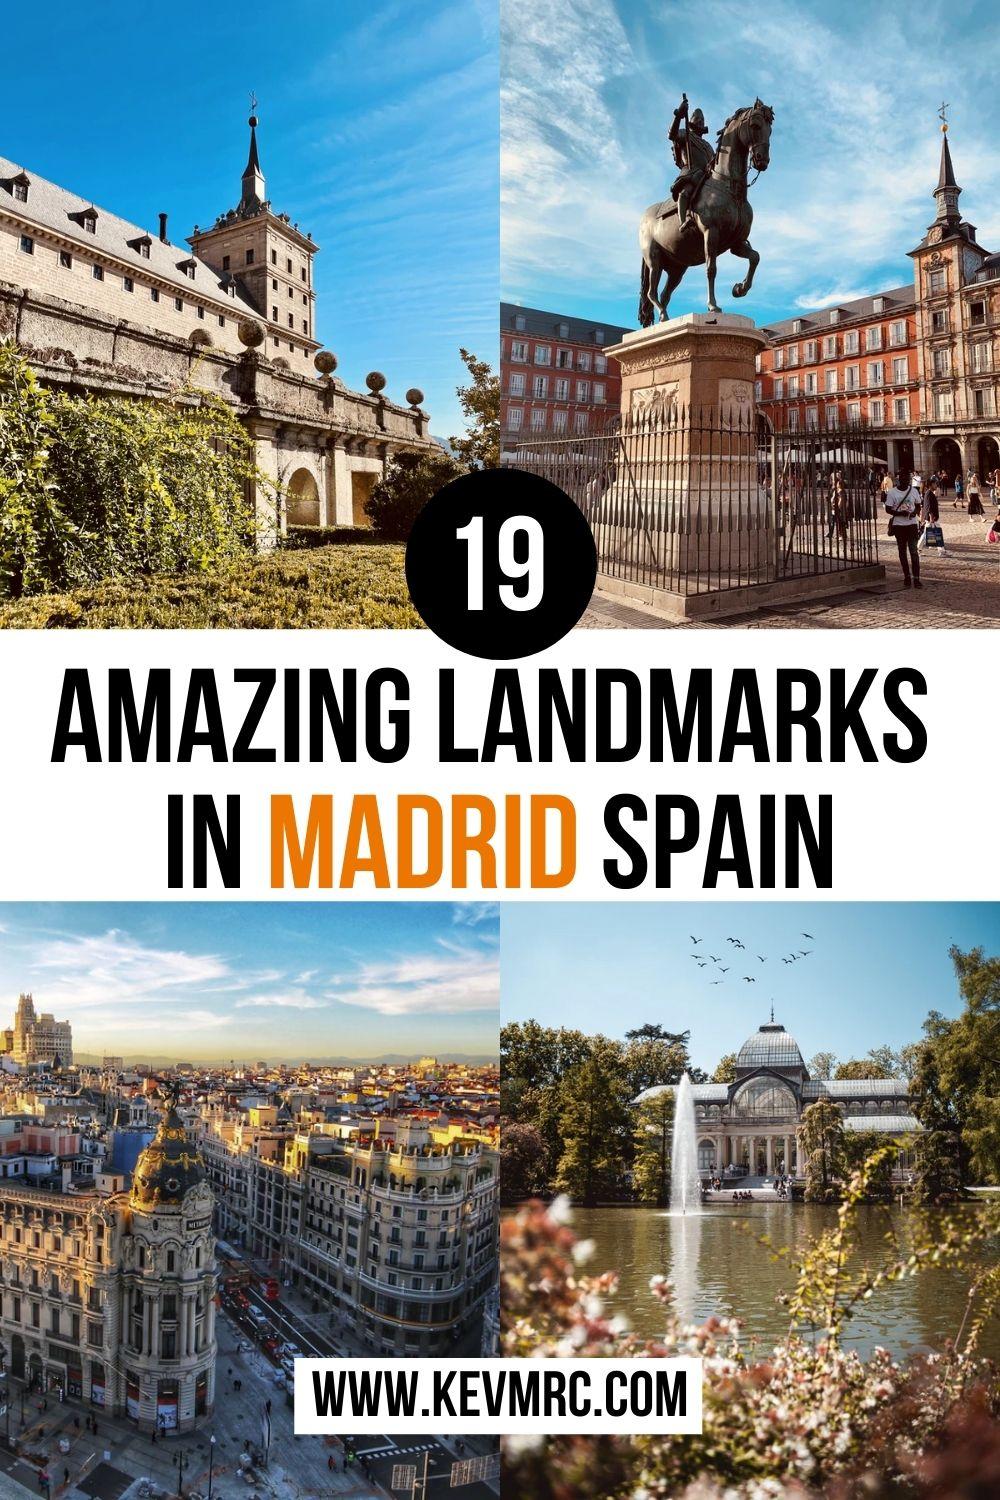 Click to discover the 19 most famous landmarks in Madrid! madrid landmarks and monuments | madrid landmarks map | popular madrid landmarks | madrid historical landmarks | spain madrid landmarks | best landmarks in madrid spain | madrid bucket list